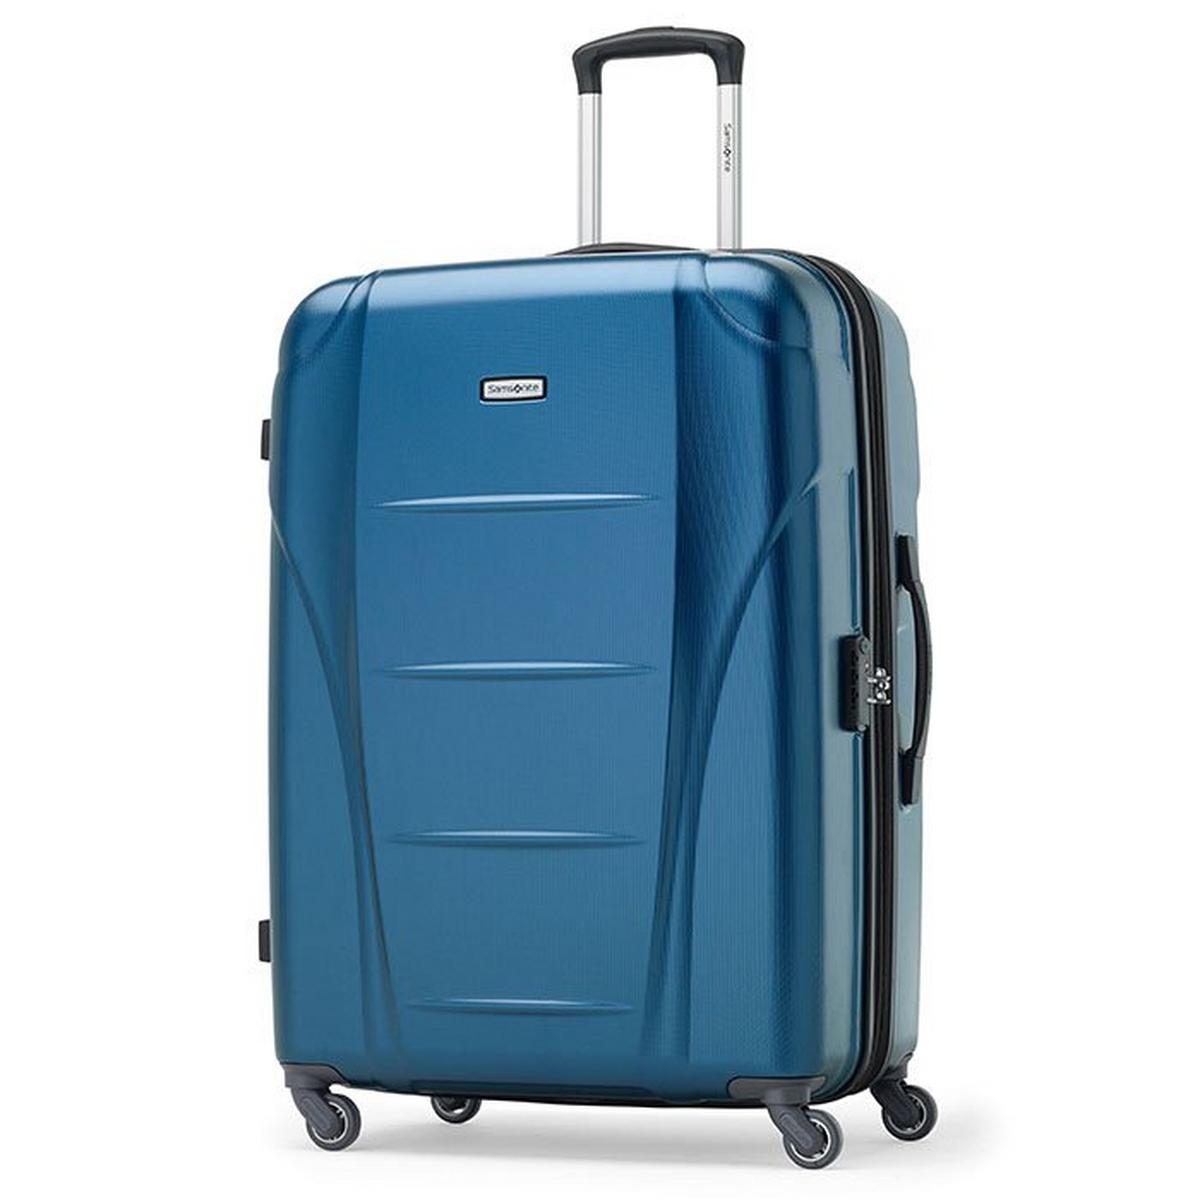 Winfield NXT Spinner Large Luggage